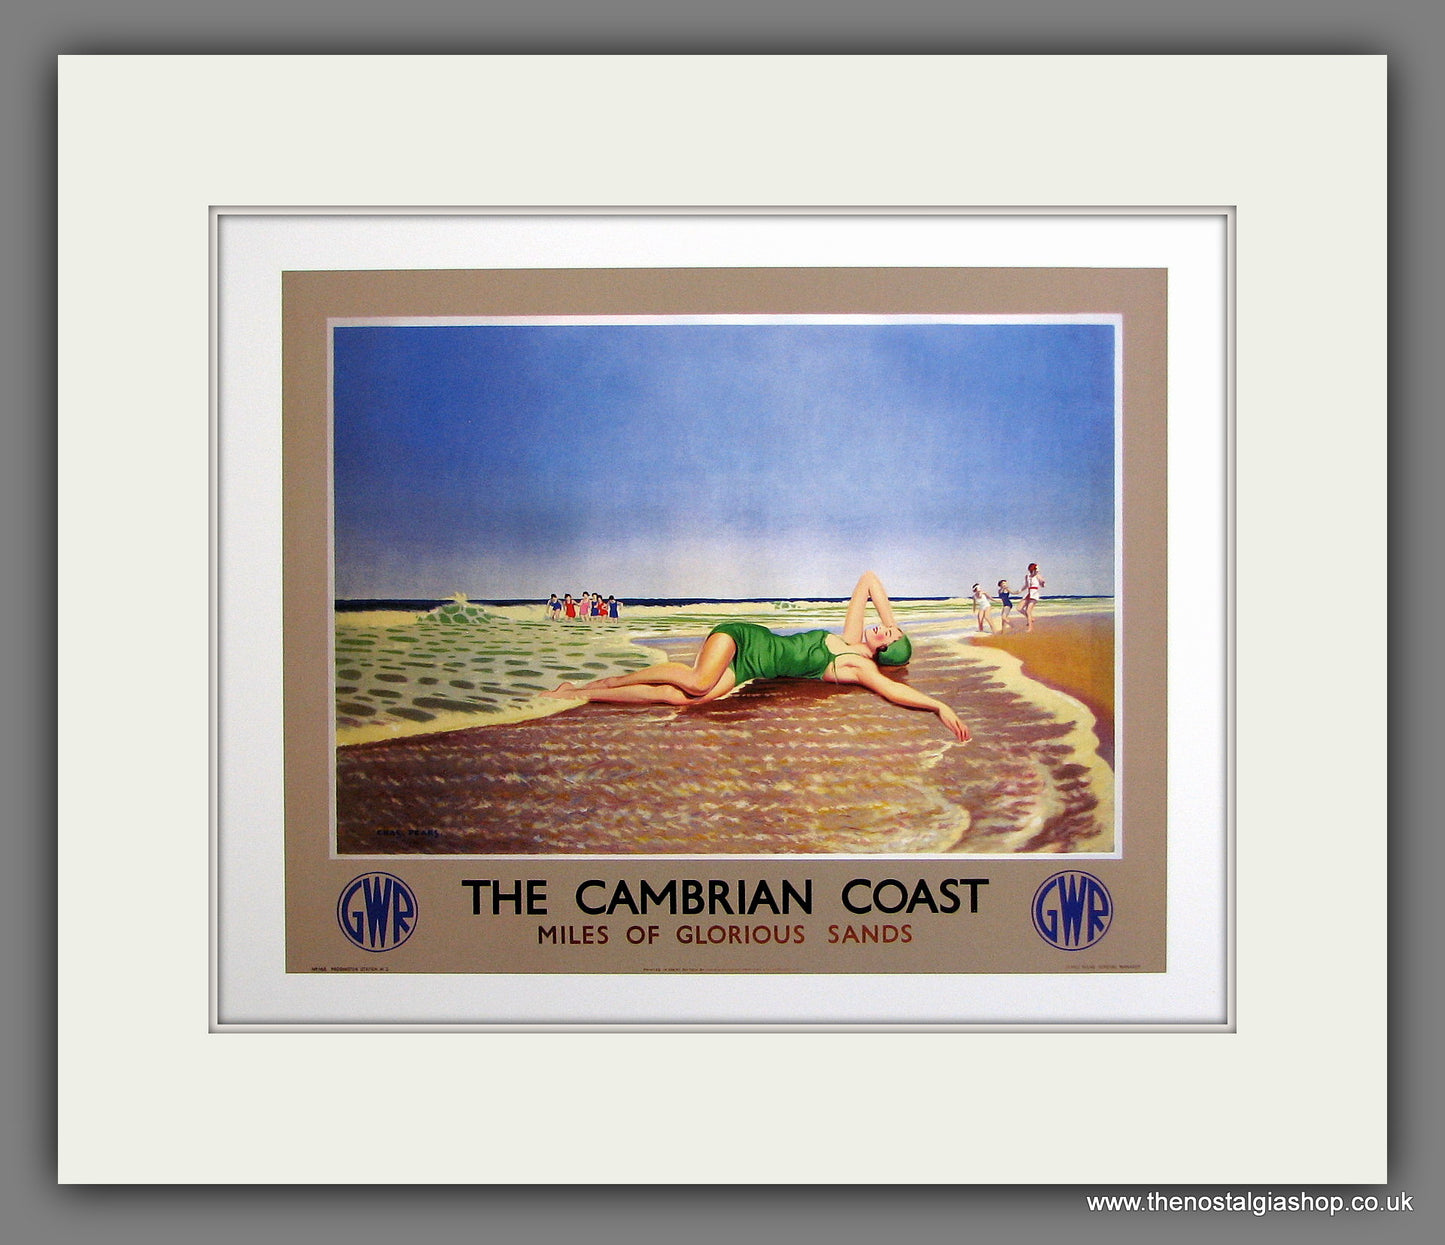 Cambrian Coast. Railway Travel Advert. (Reproduction). Mounted Print.